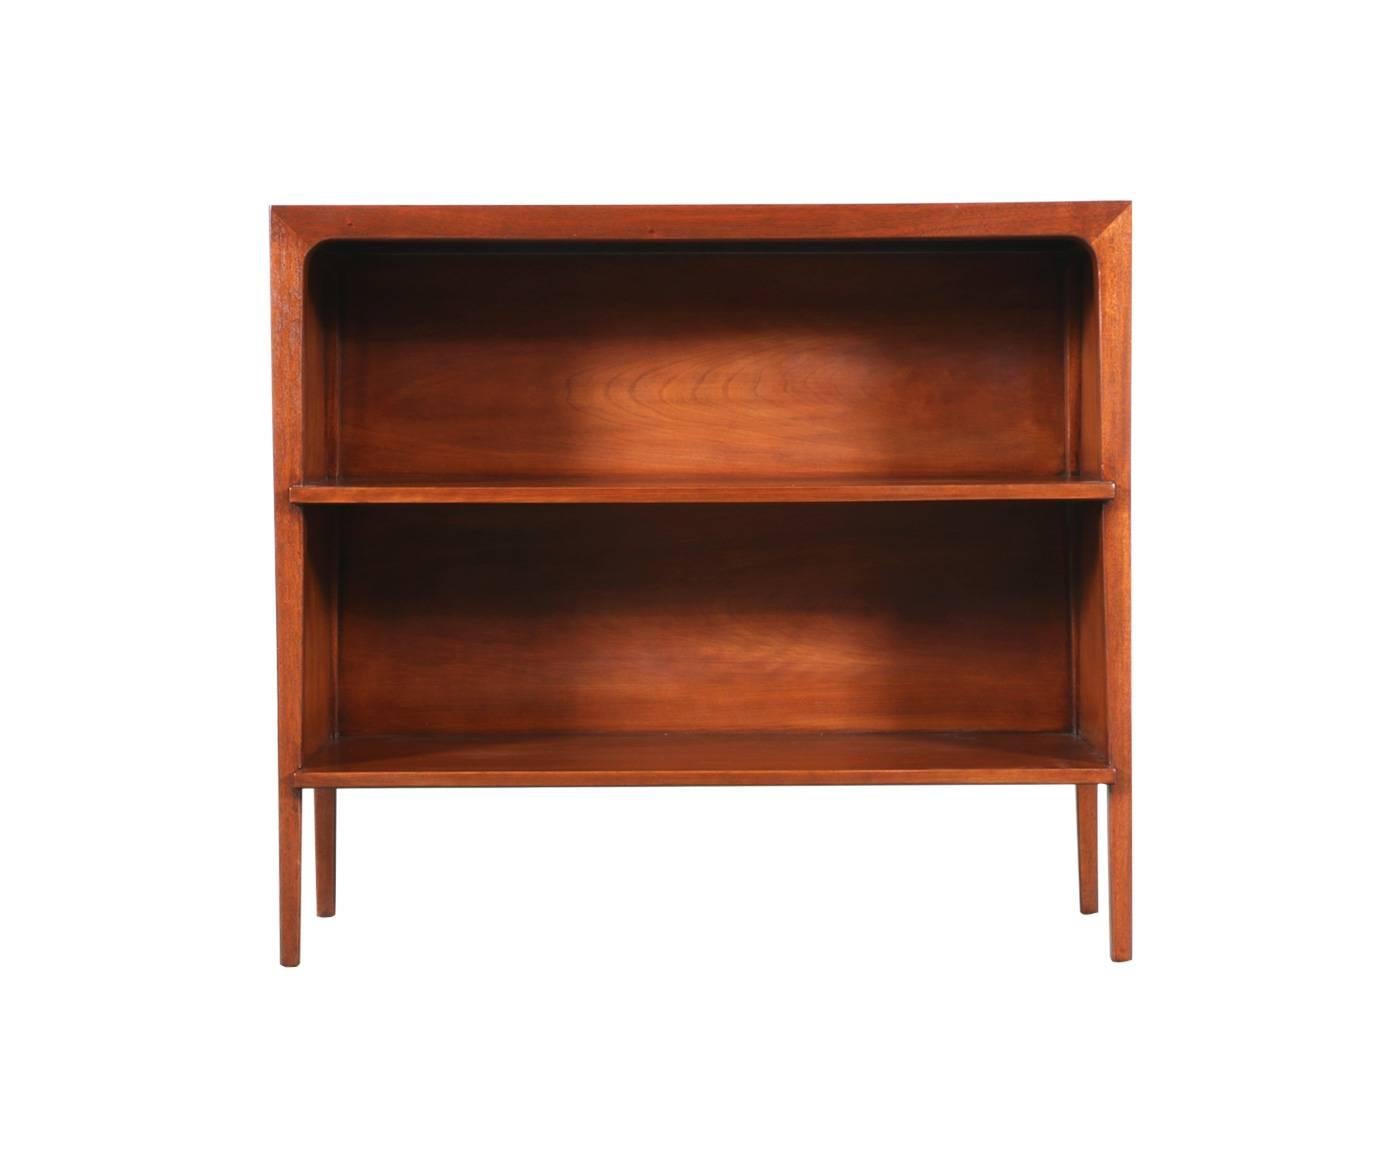 Designer: John Van Koert
Manufacturer: Drexel “Counterpoint”
Period/Style: Mid Century Modern
Country: United States
Date: 1960s

Dimensions: 30″H x 33.75″W x 12″D
Materials: Walnut
Condition: Excellent – Newly Refinished
Number of Items: